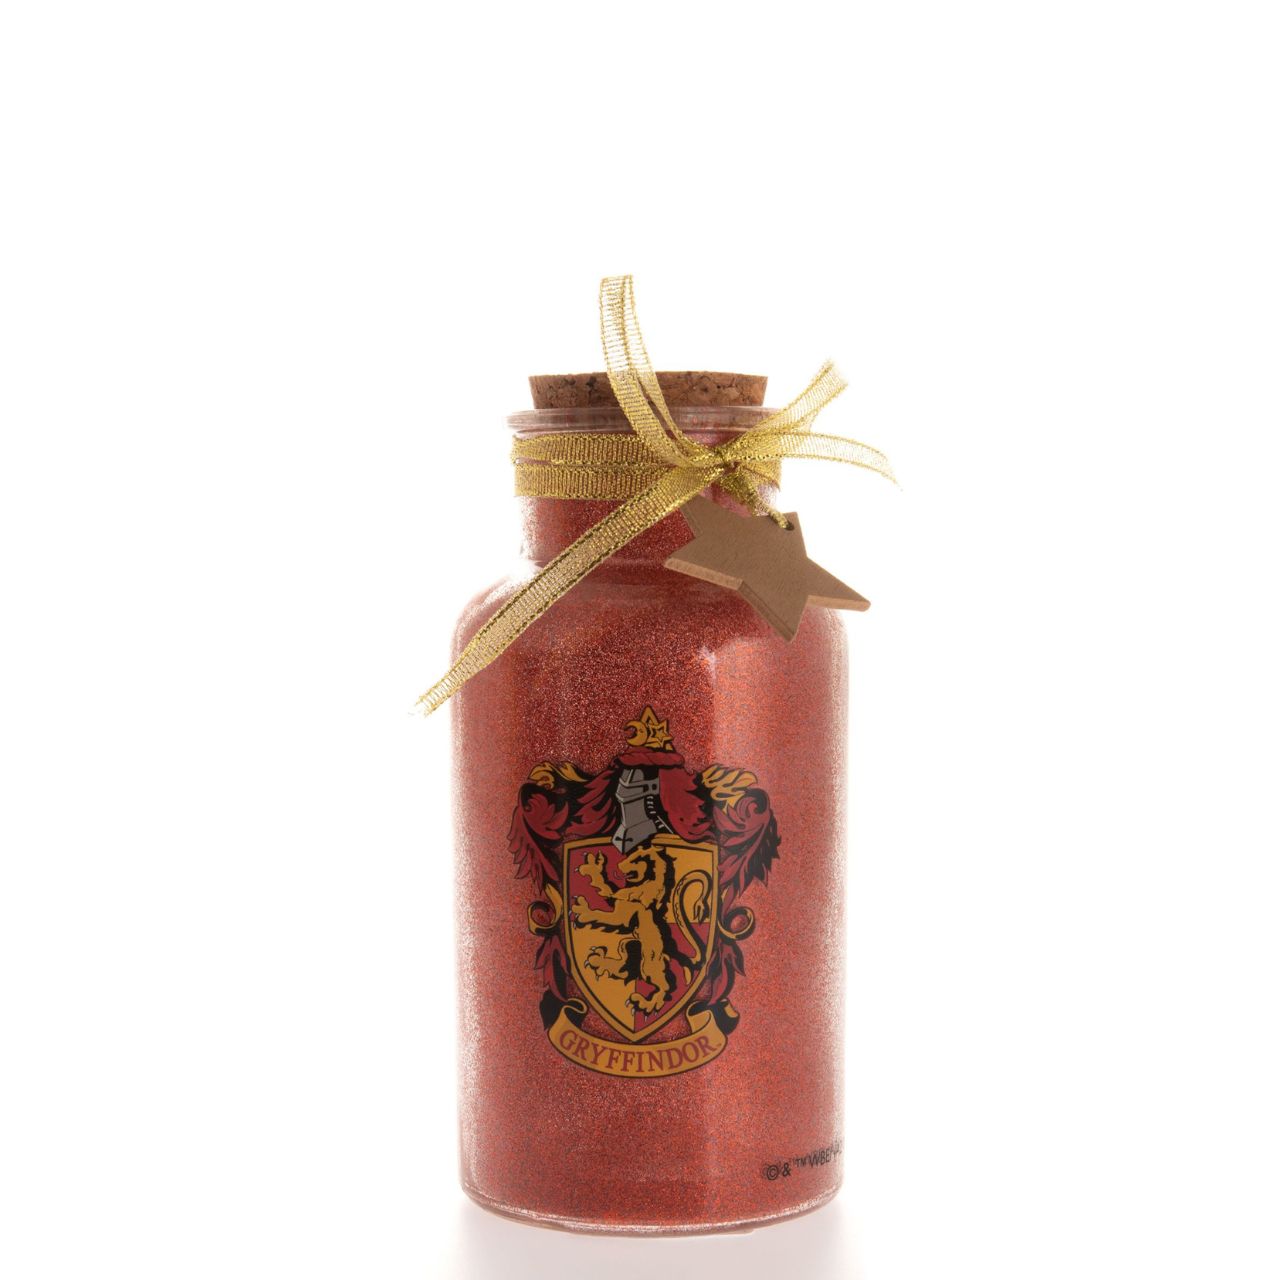 Harry Potter LED Light Up Glass Jar House - Gryffindor  Lumos maxima! Light up your home this Christmas with these LED glass jar lights. With a glitter design and featuring all four houses, these accessories are sure to add a sprinkle of magic.